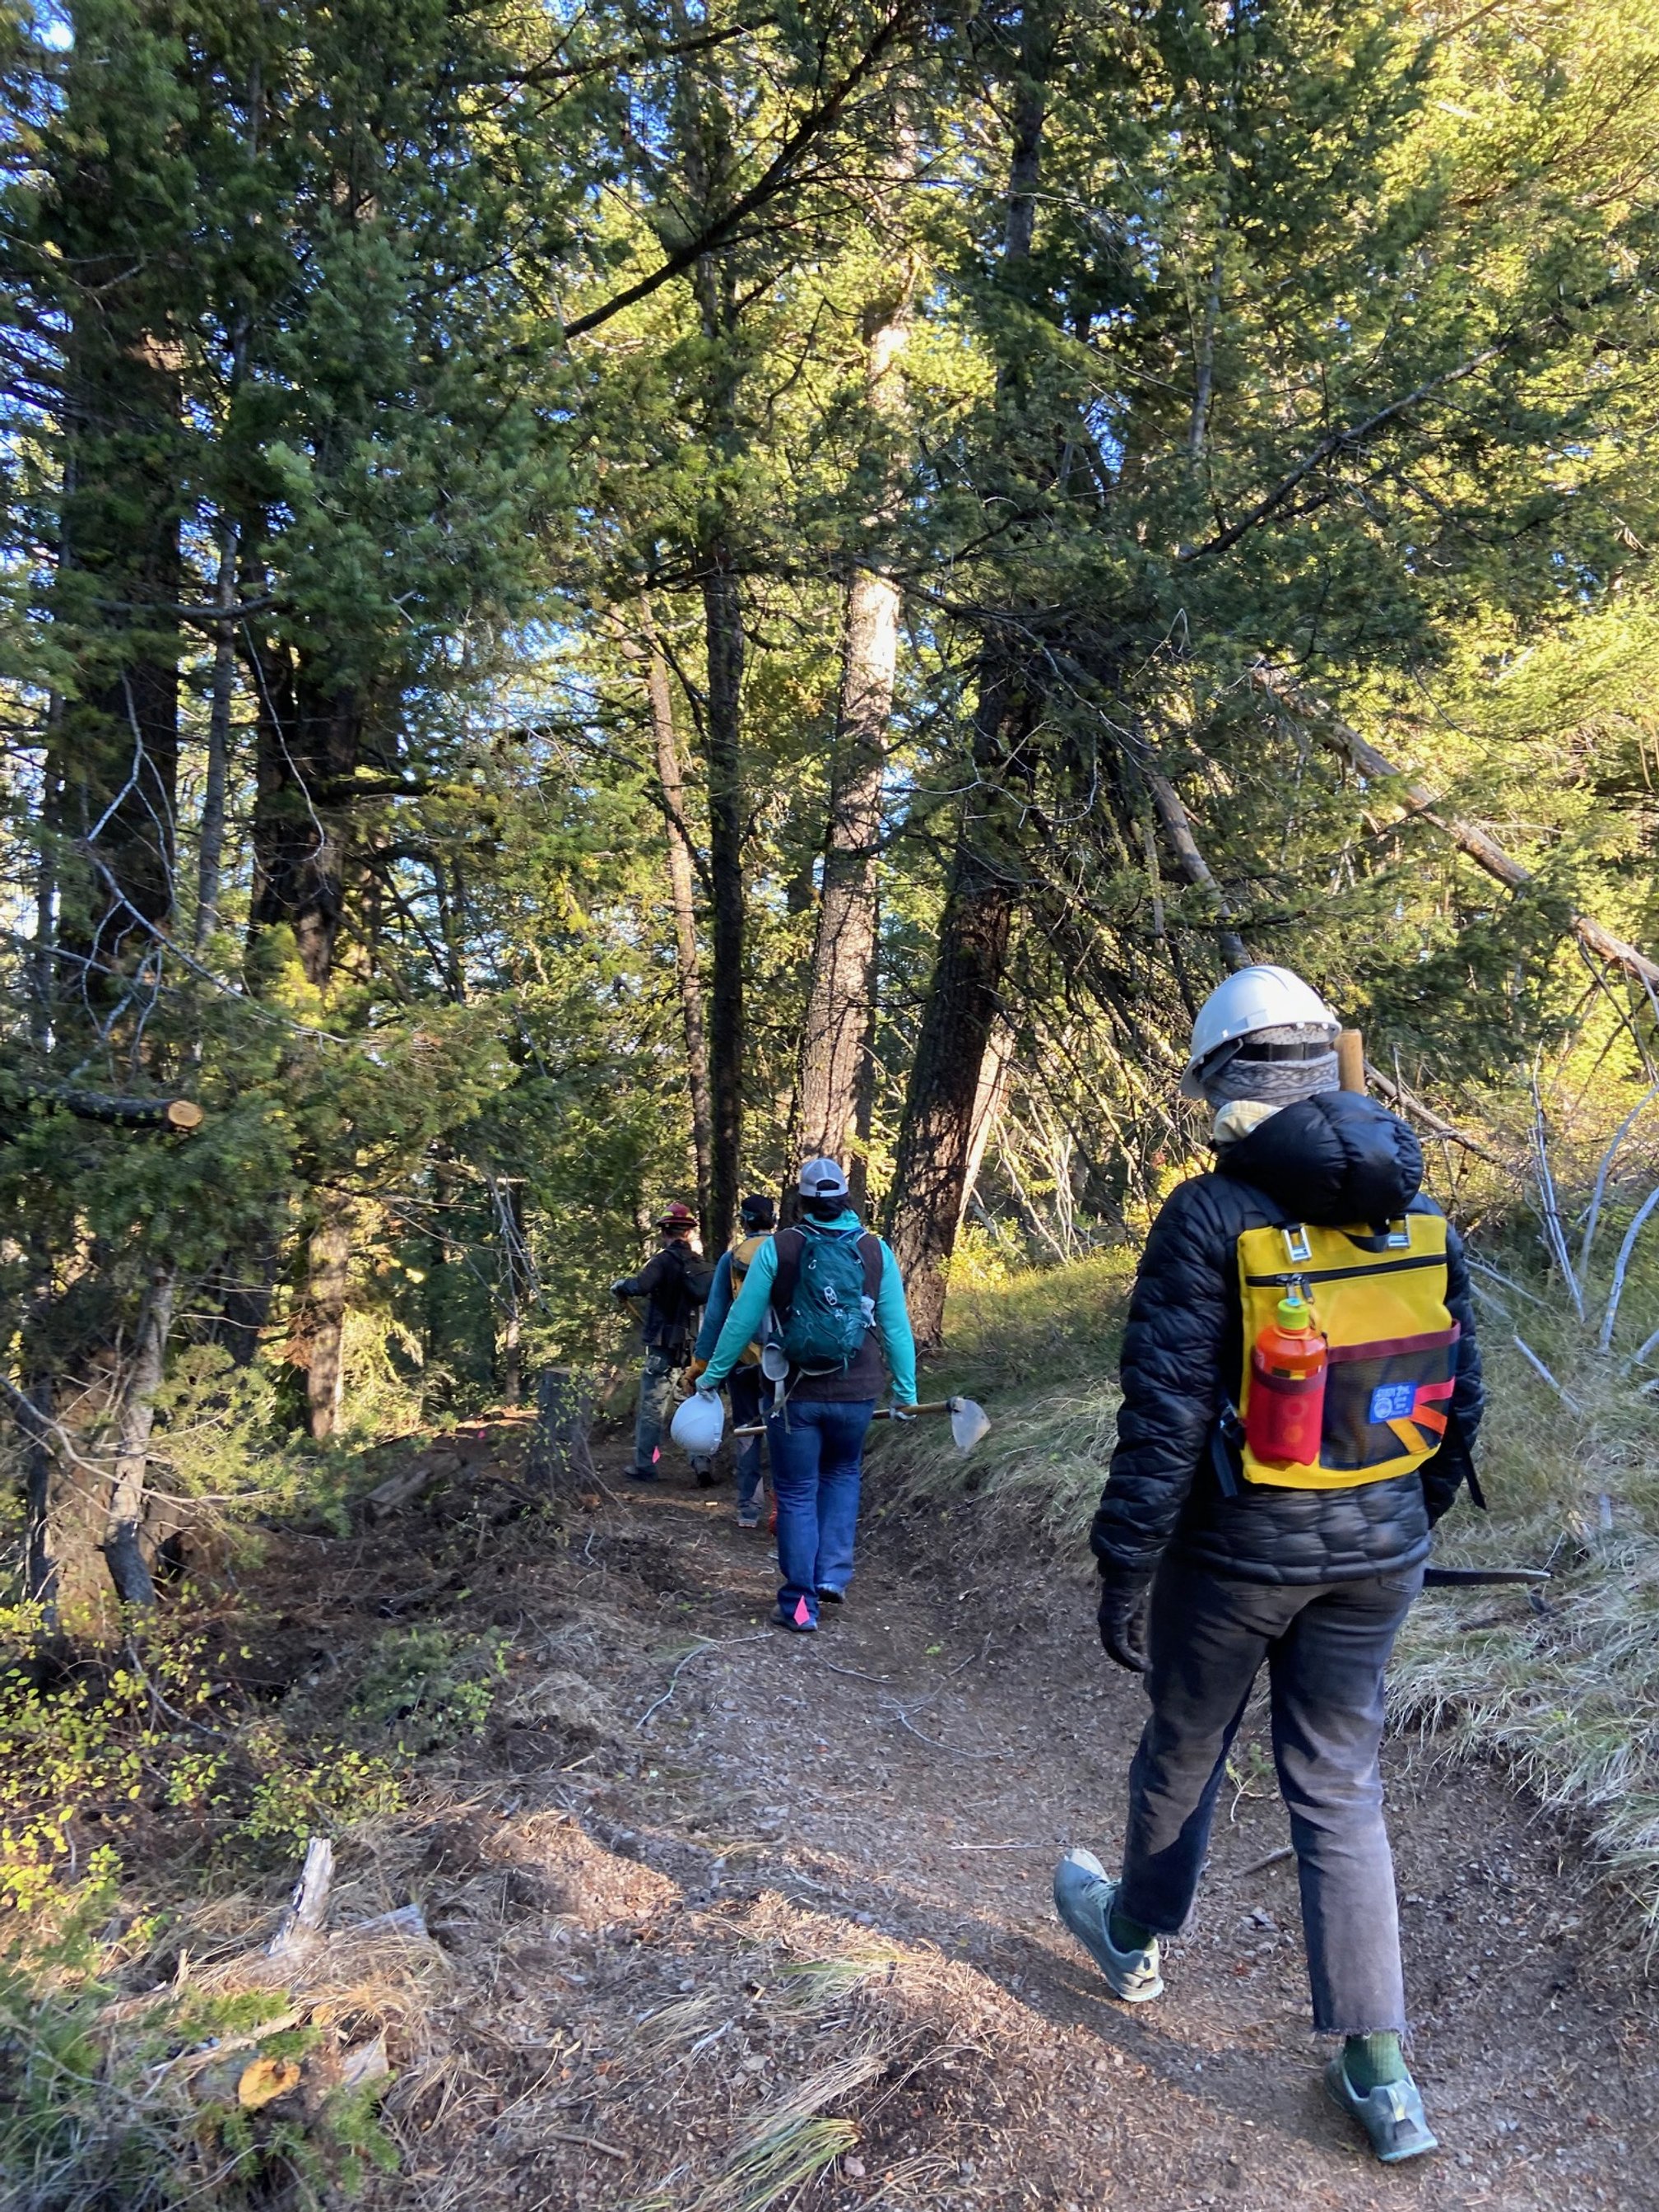 The crew heads up trail to a new reroute section